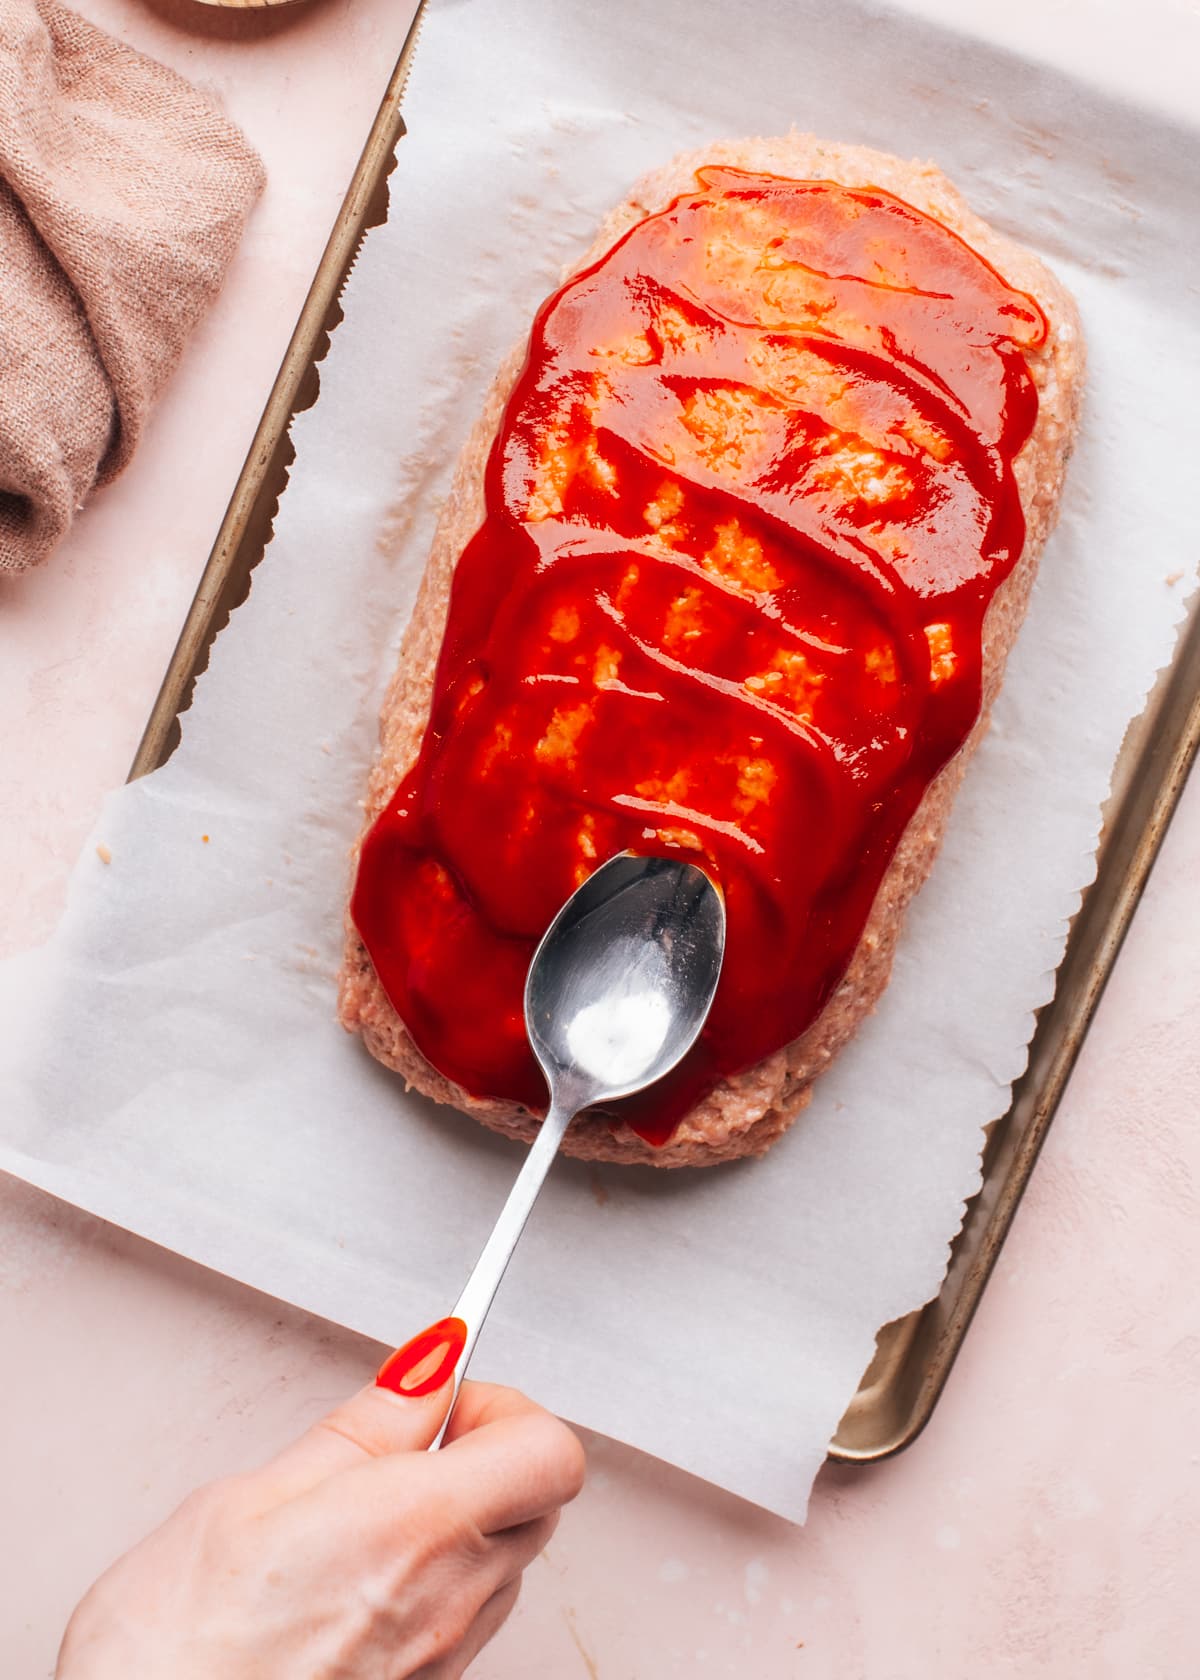 Spreading sauce on meatloaf with spoon